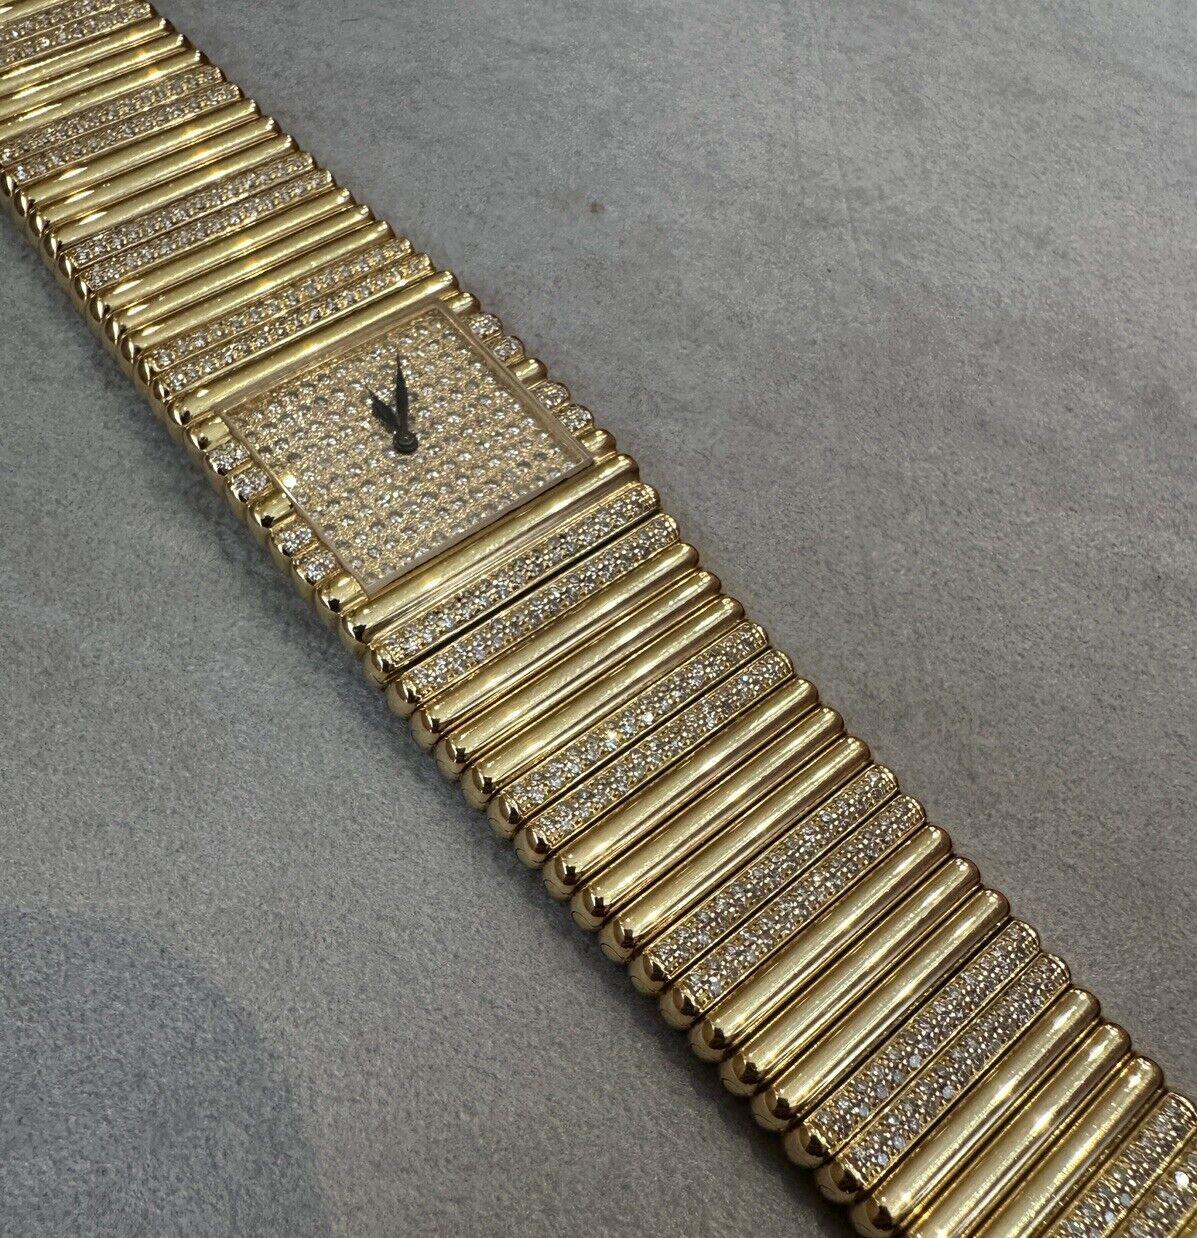 Piaget Emperador 18k Yellow Gold Watch Factory Diamonds

The Original Piaget Emperador Watch is an all 18k Yellow Gold timepiece featuring a Square Diamond Dial with Black Hands and Factory Single Cut Diamonds on the band and dial. This watch has a